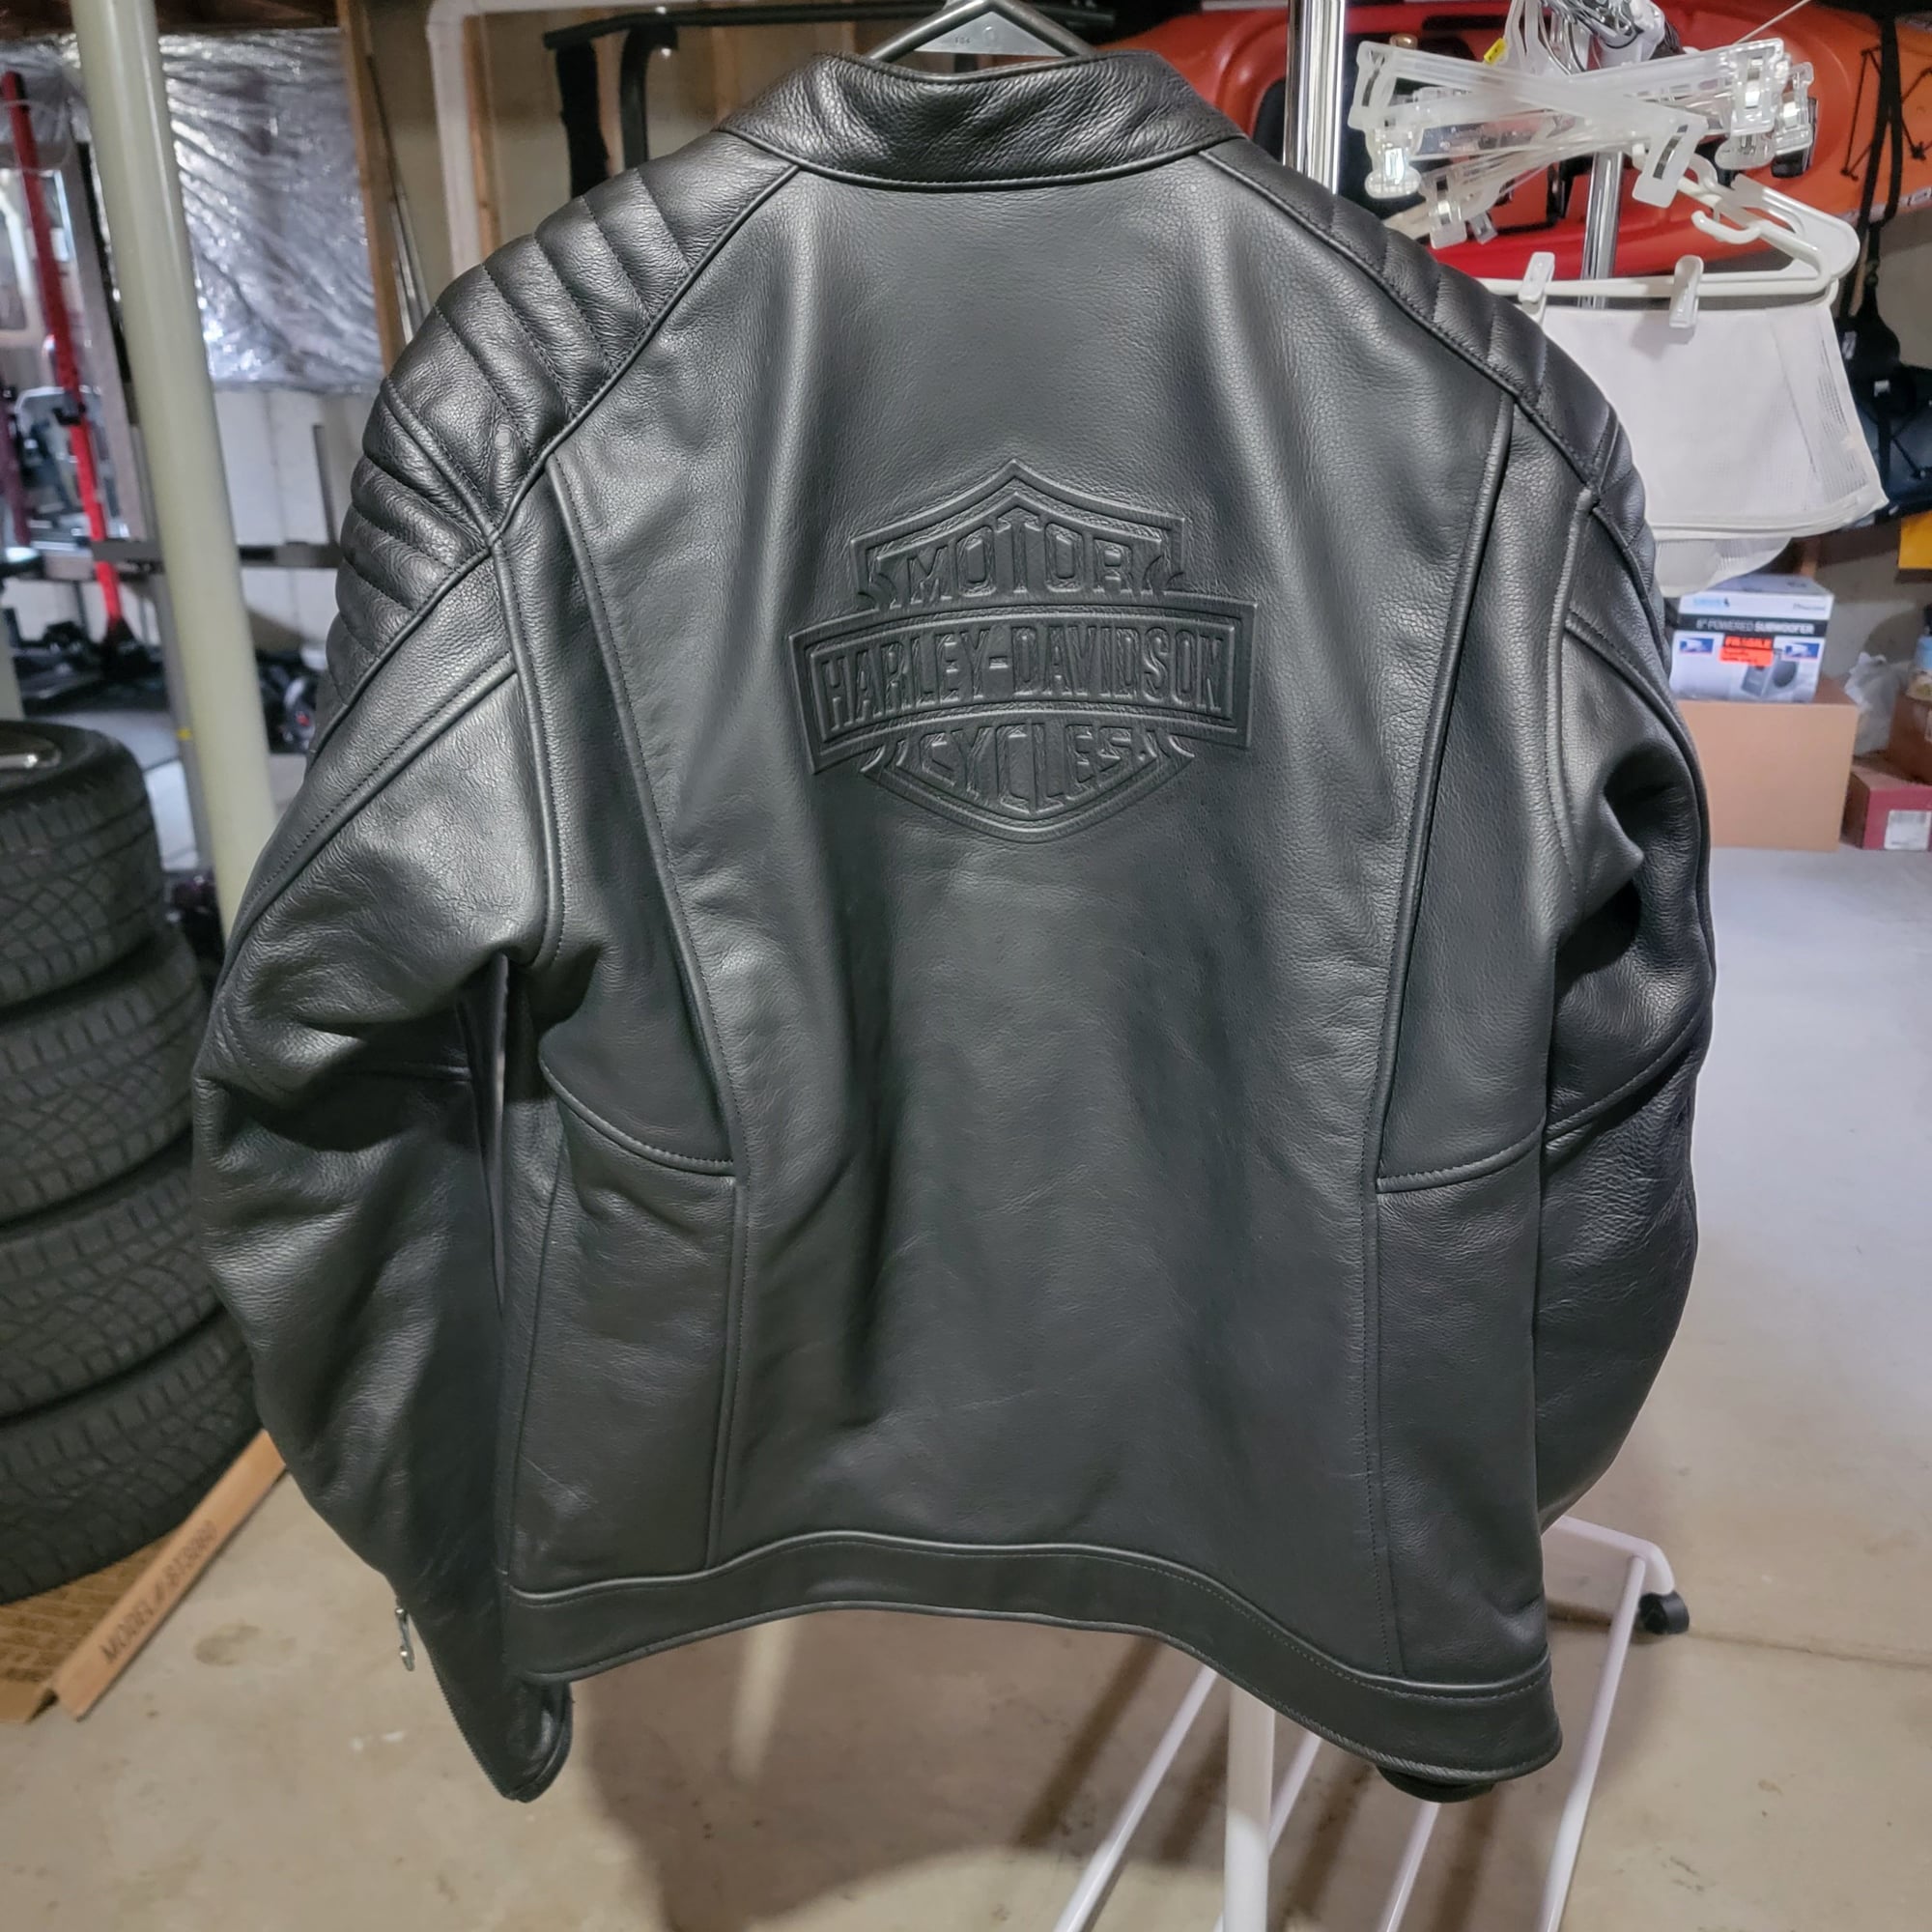 EMBEDDED BIKER LEATHER JACKET R750 CONTACT 0745461350 STORE : 367